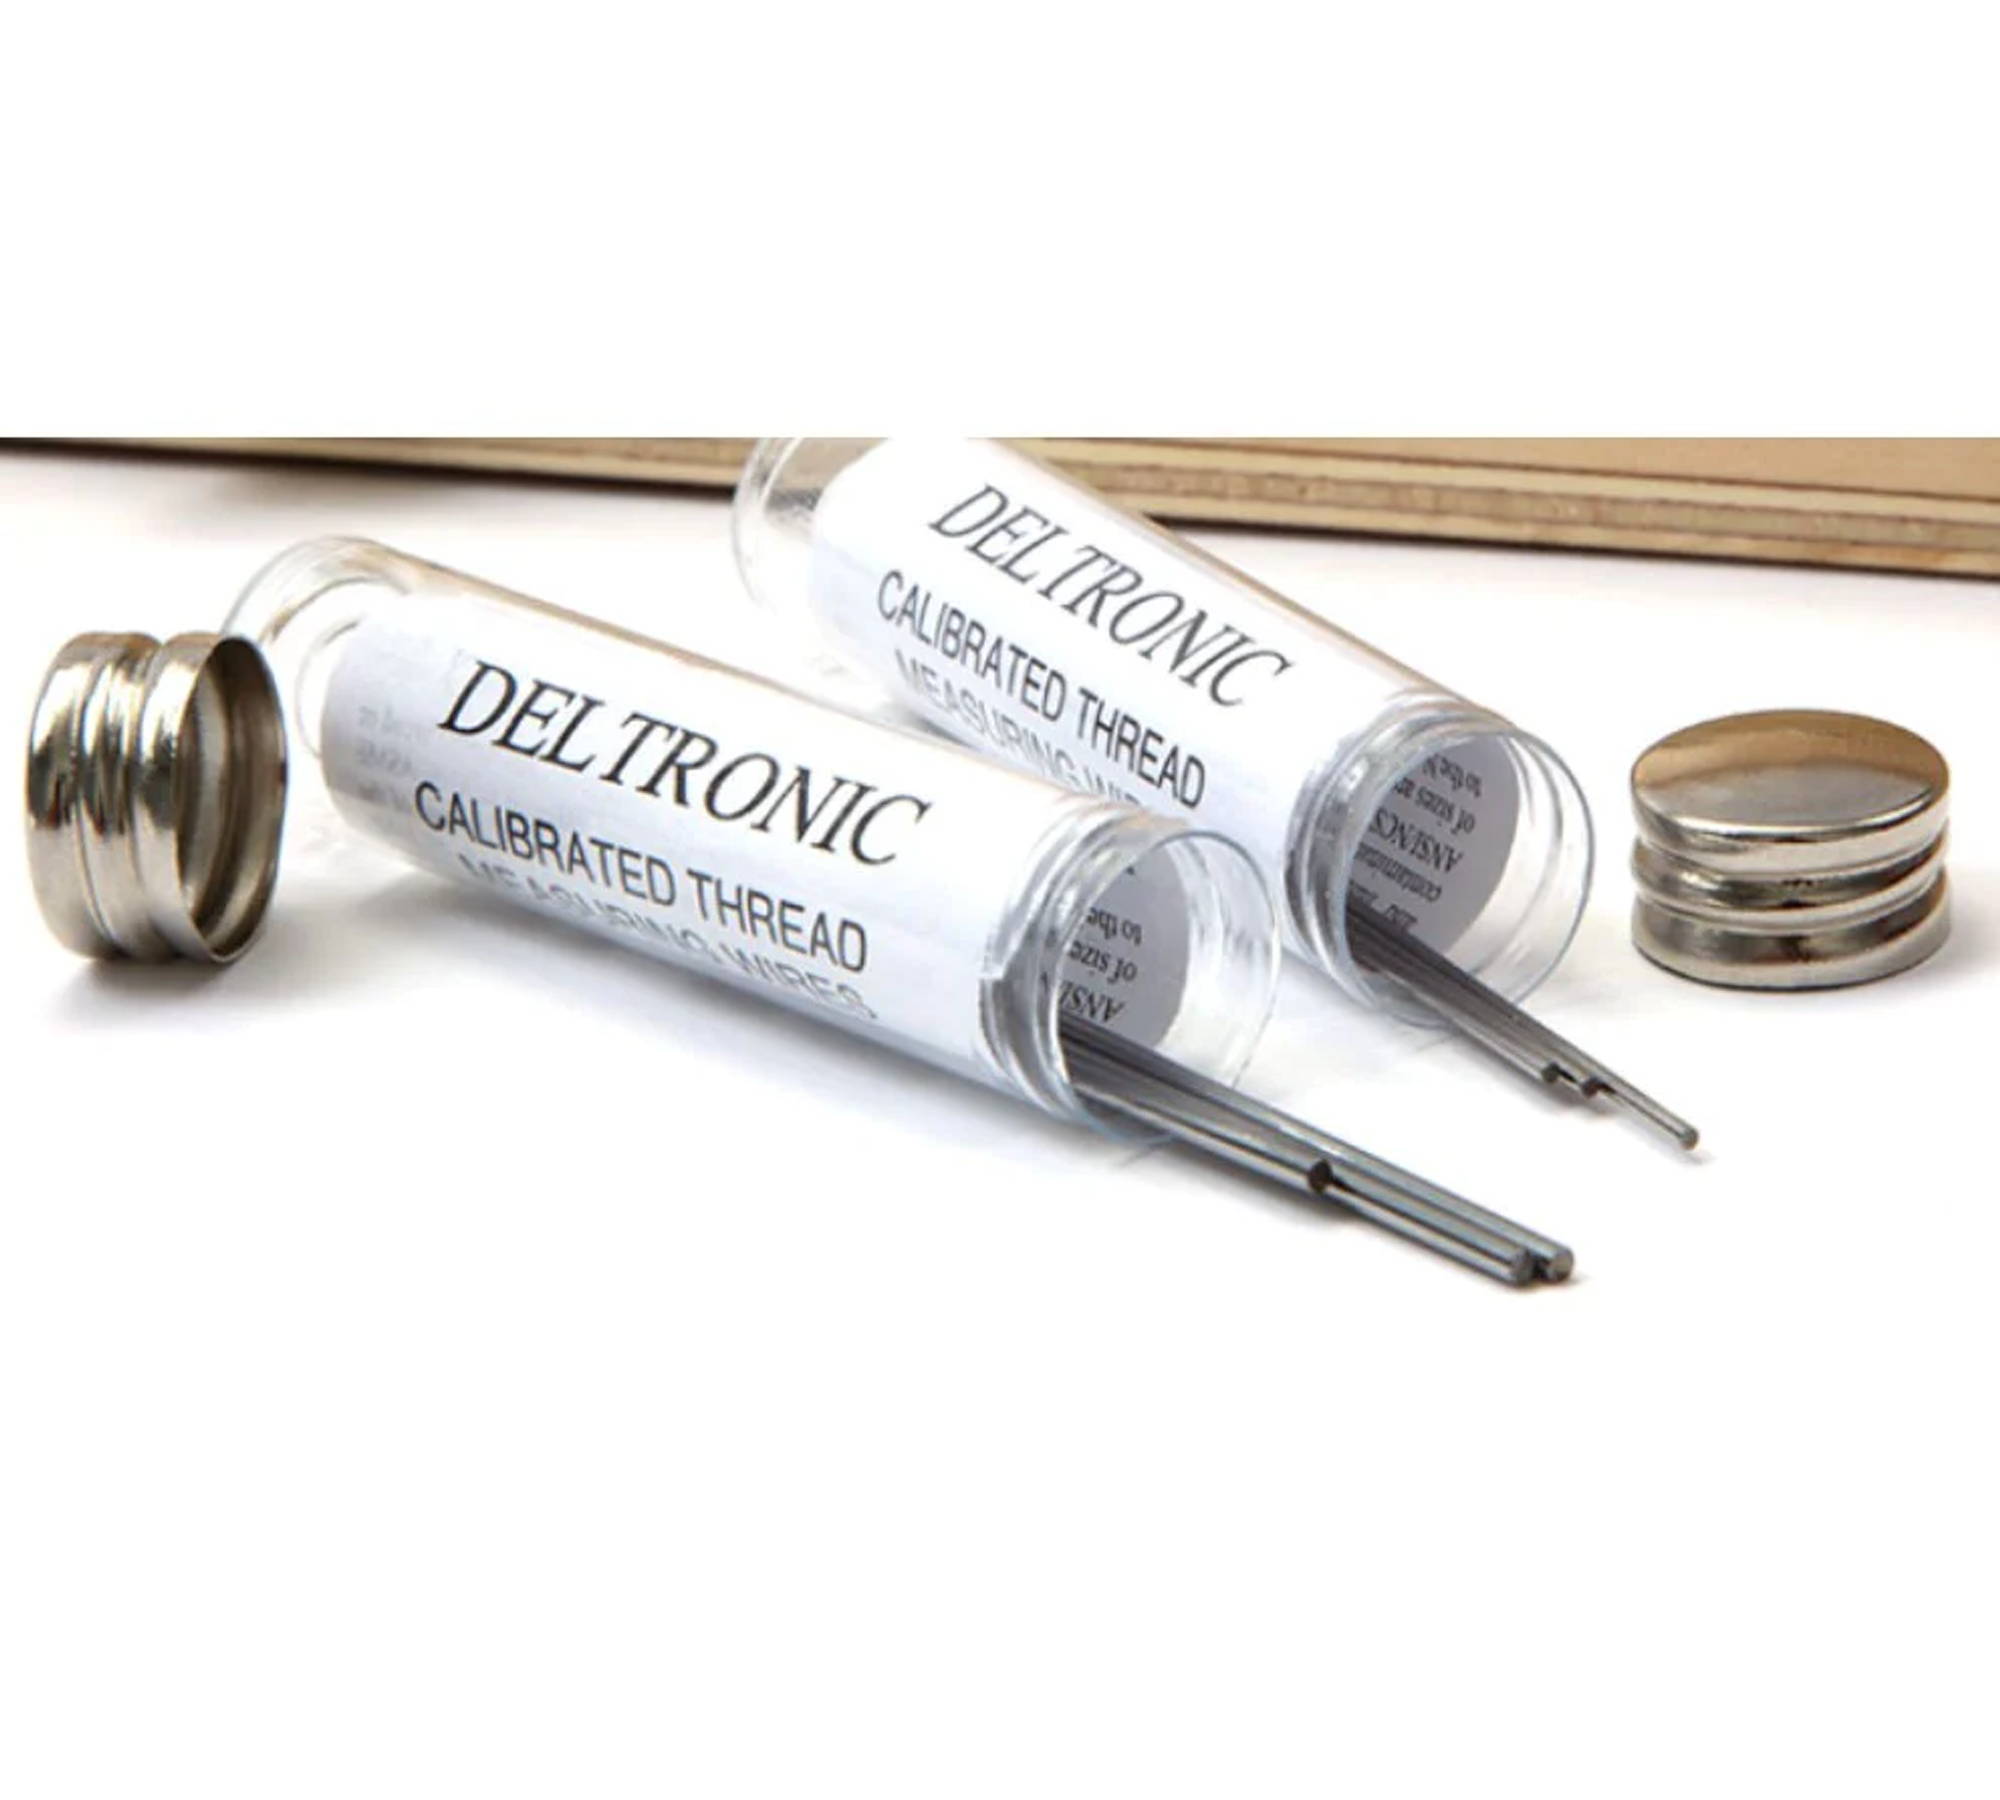 Deltronic Thread 3-Wire Sets at GreatGages.com